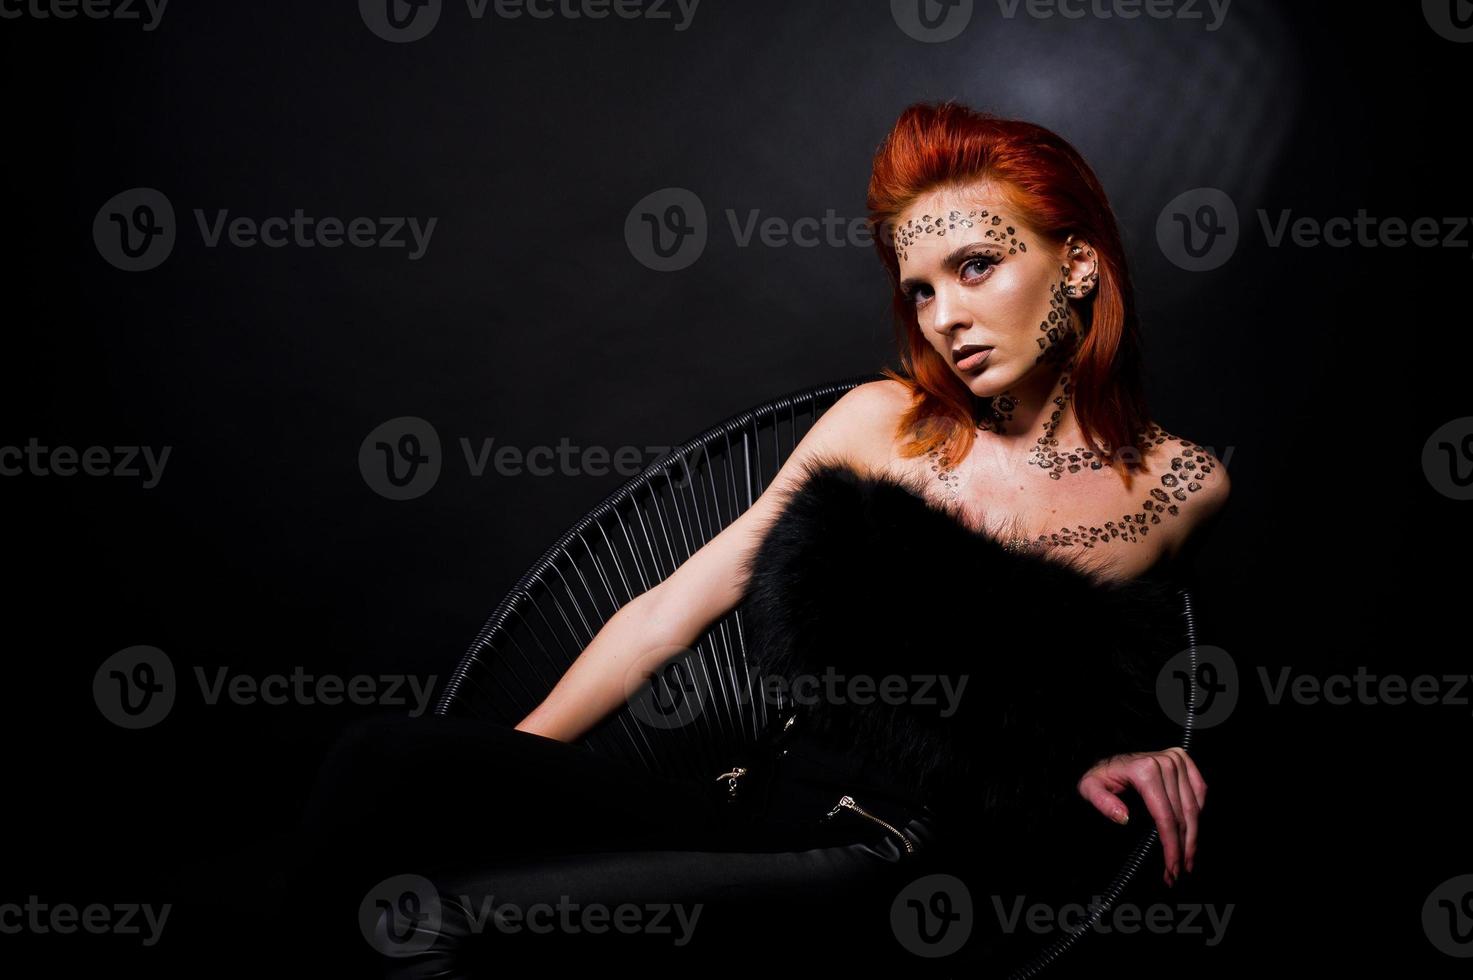 Fashion model red haired girl with originally make up like leopard predator isolated on black. Studio portrait on chair. photo